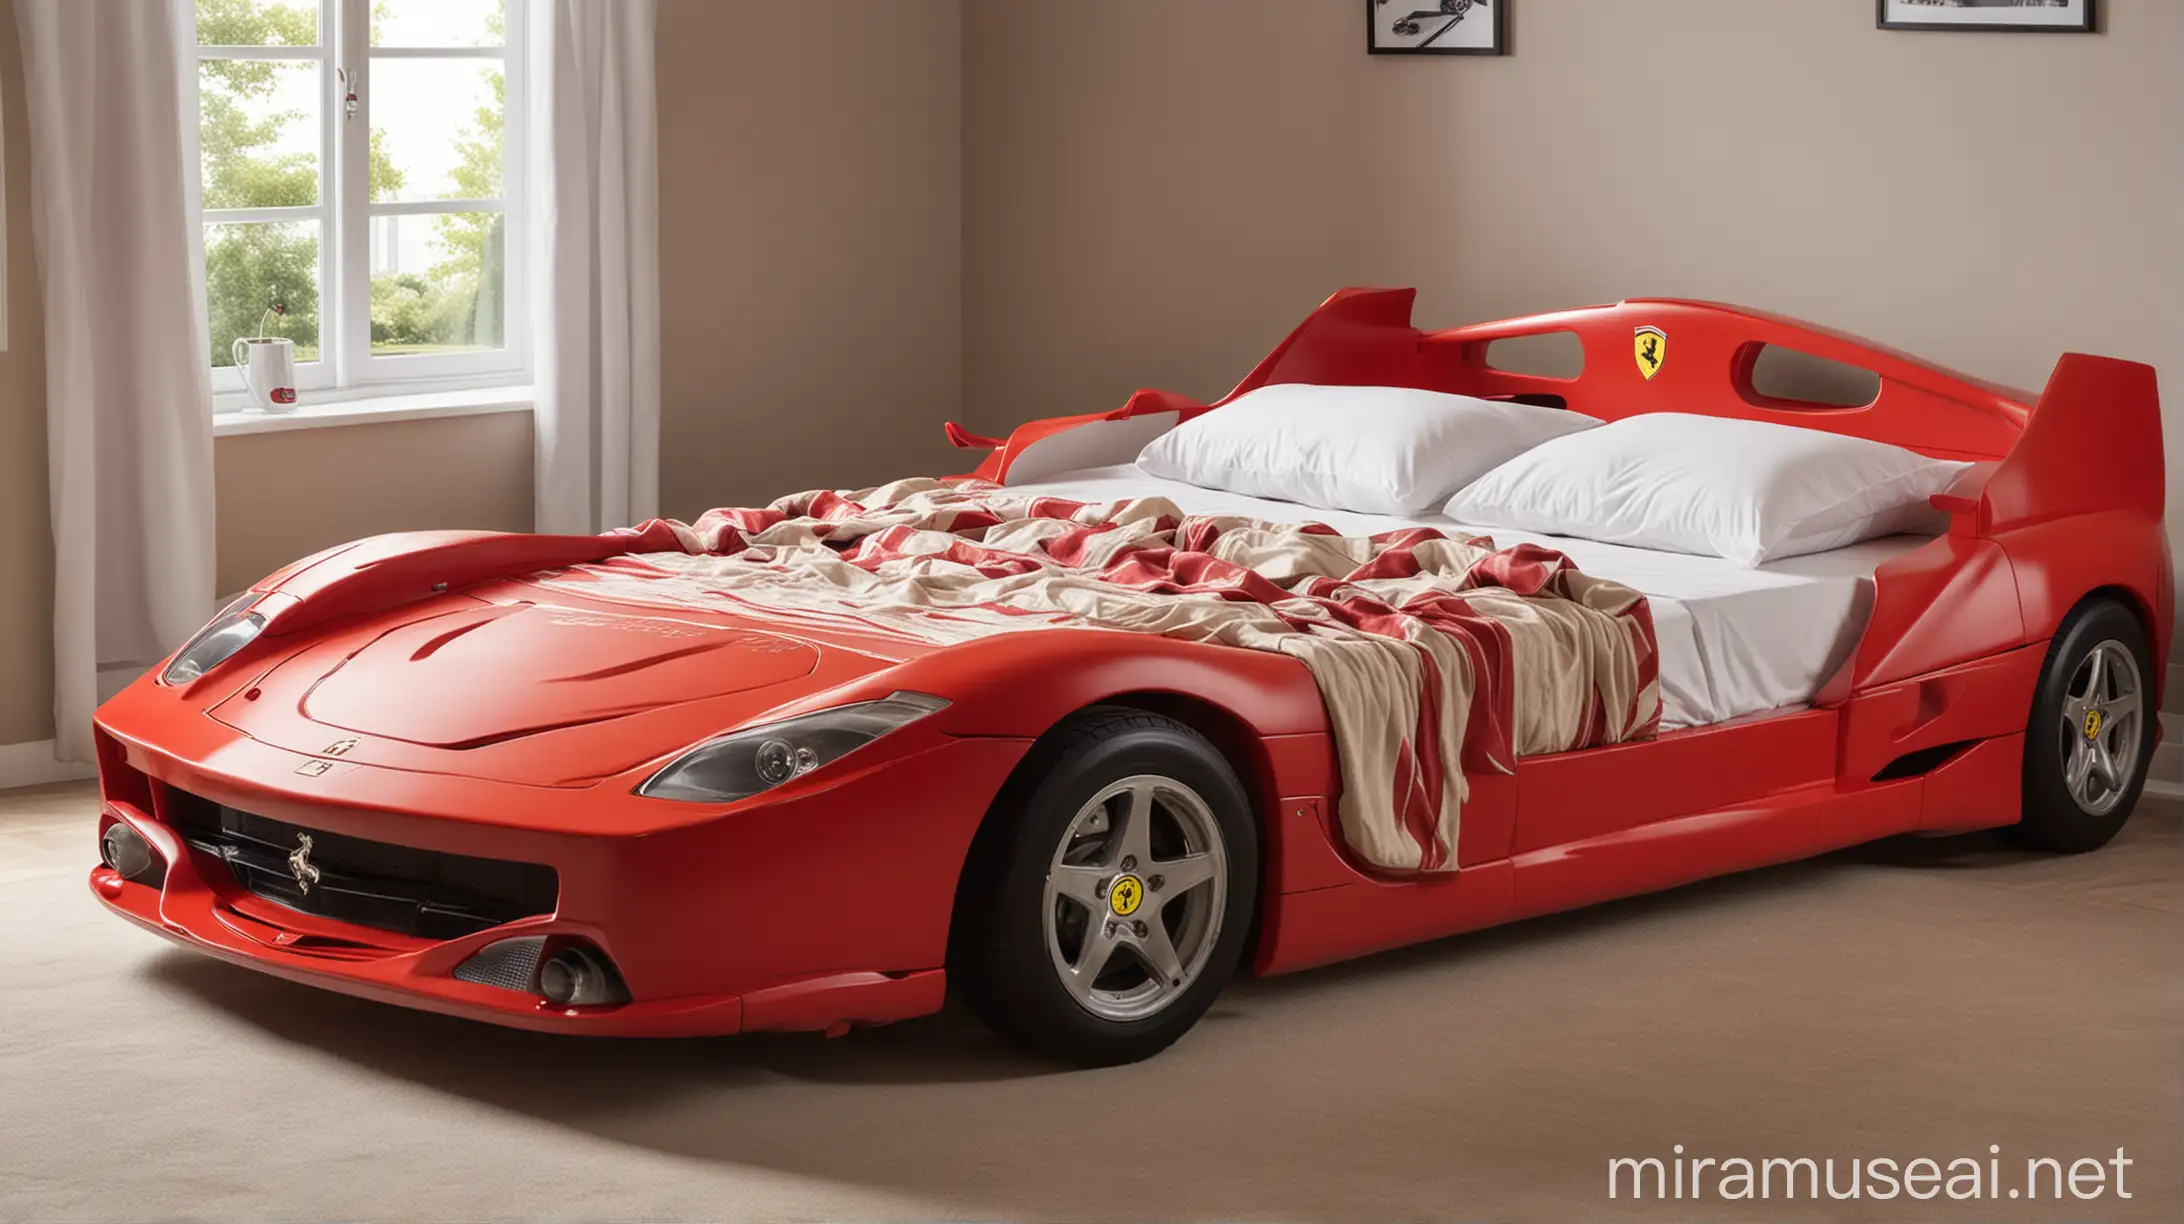 Luxurious Ferrari Car Bed for a Stylish Bedroom